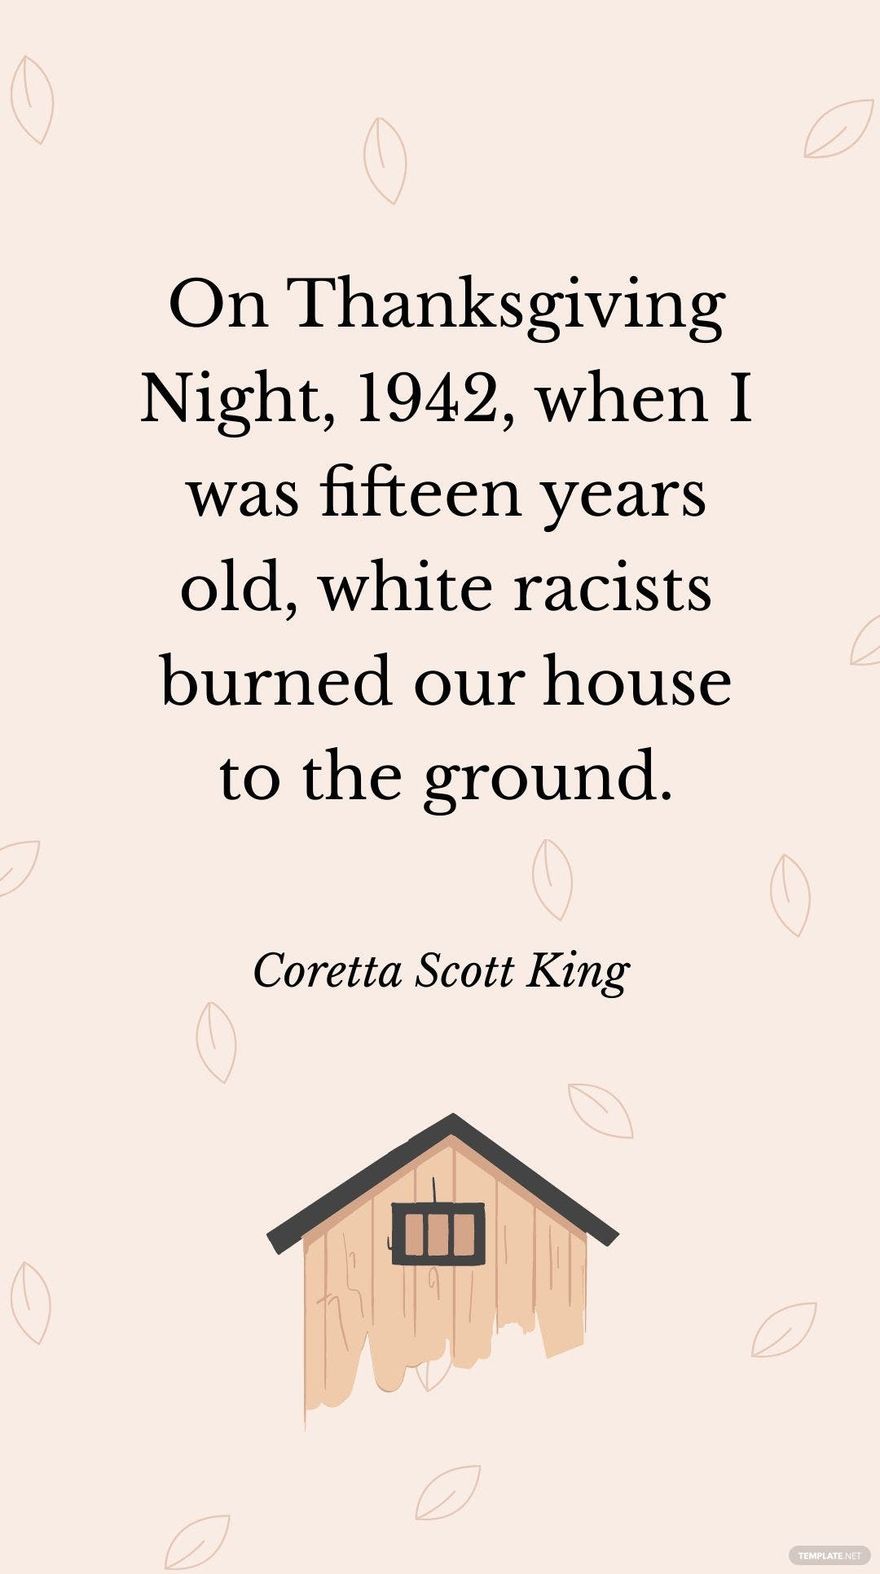 Free Coretta Scott King - On Thanksgiving Night, 1942, when I was fifteen years old, white racists burned our house to the ground.